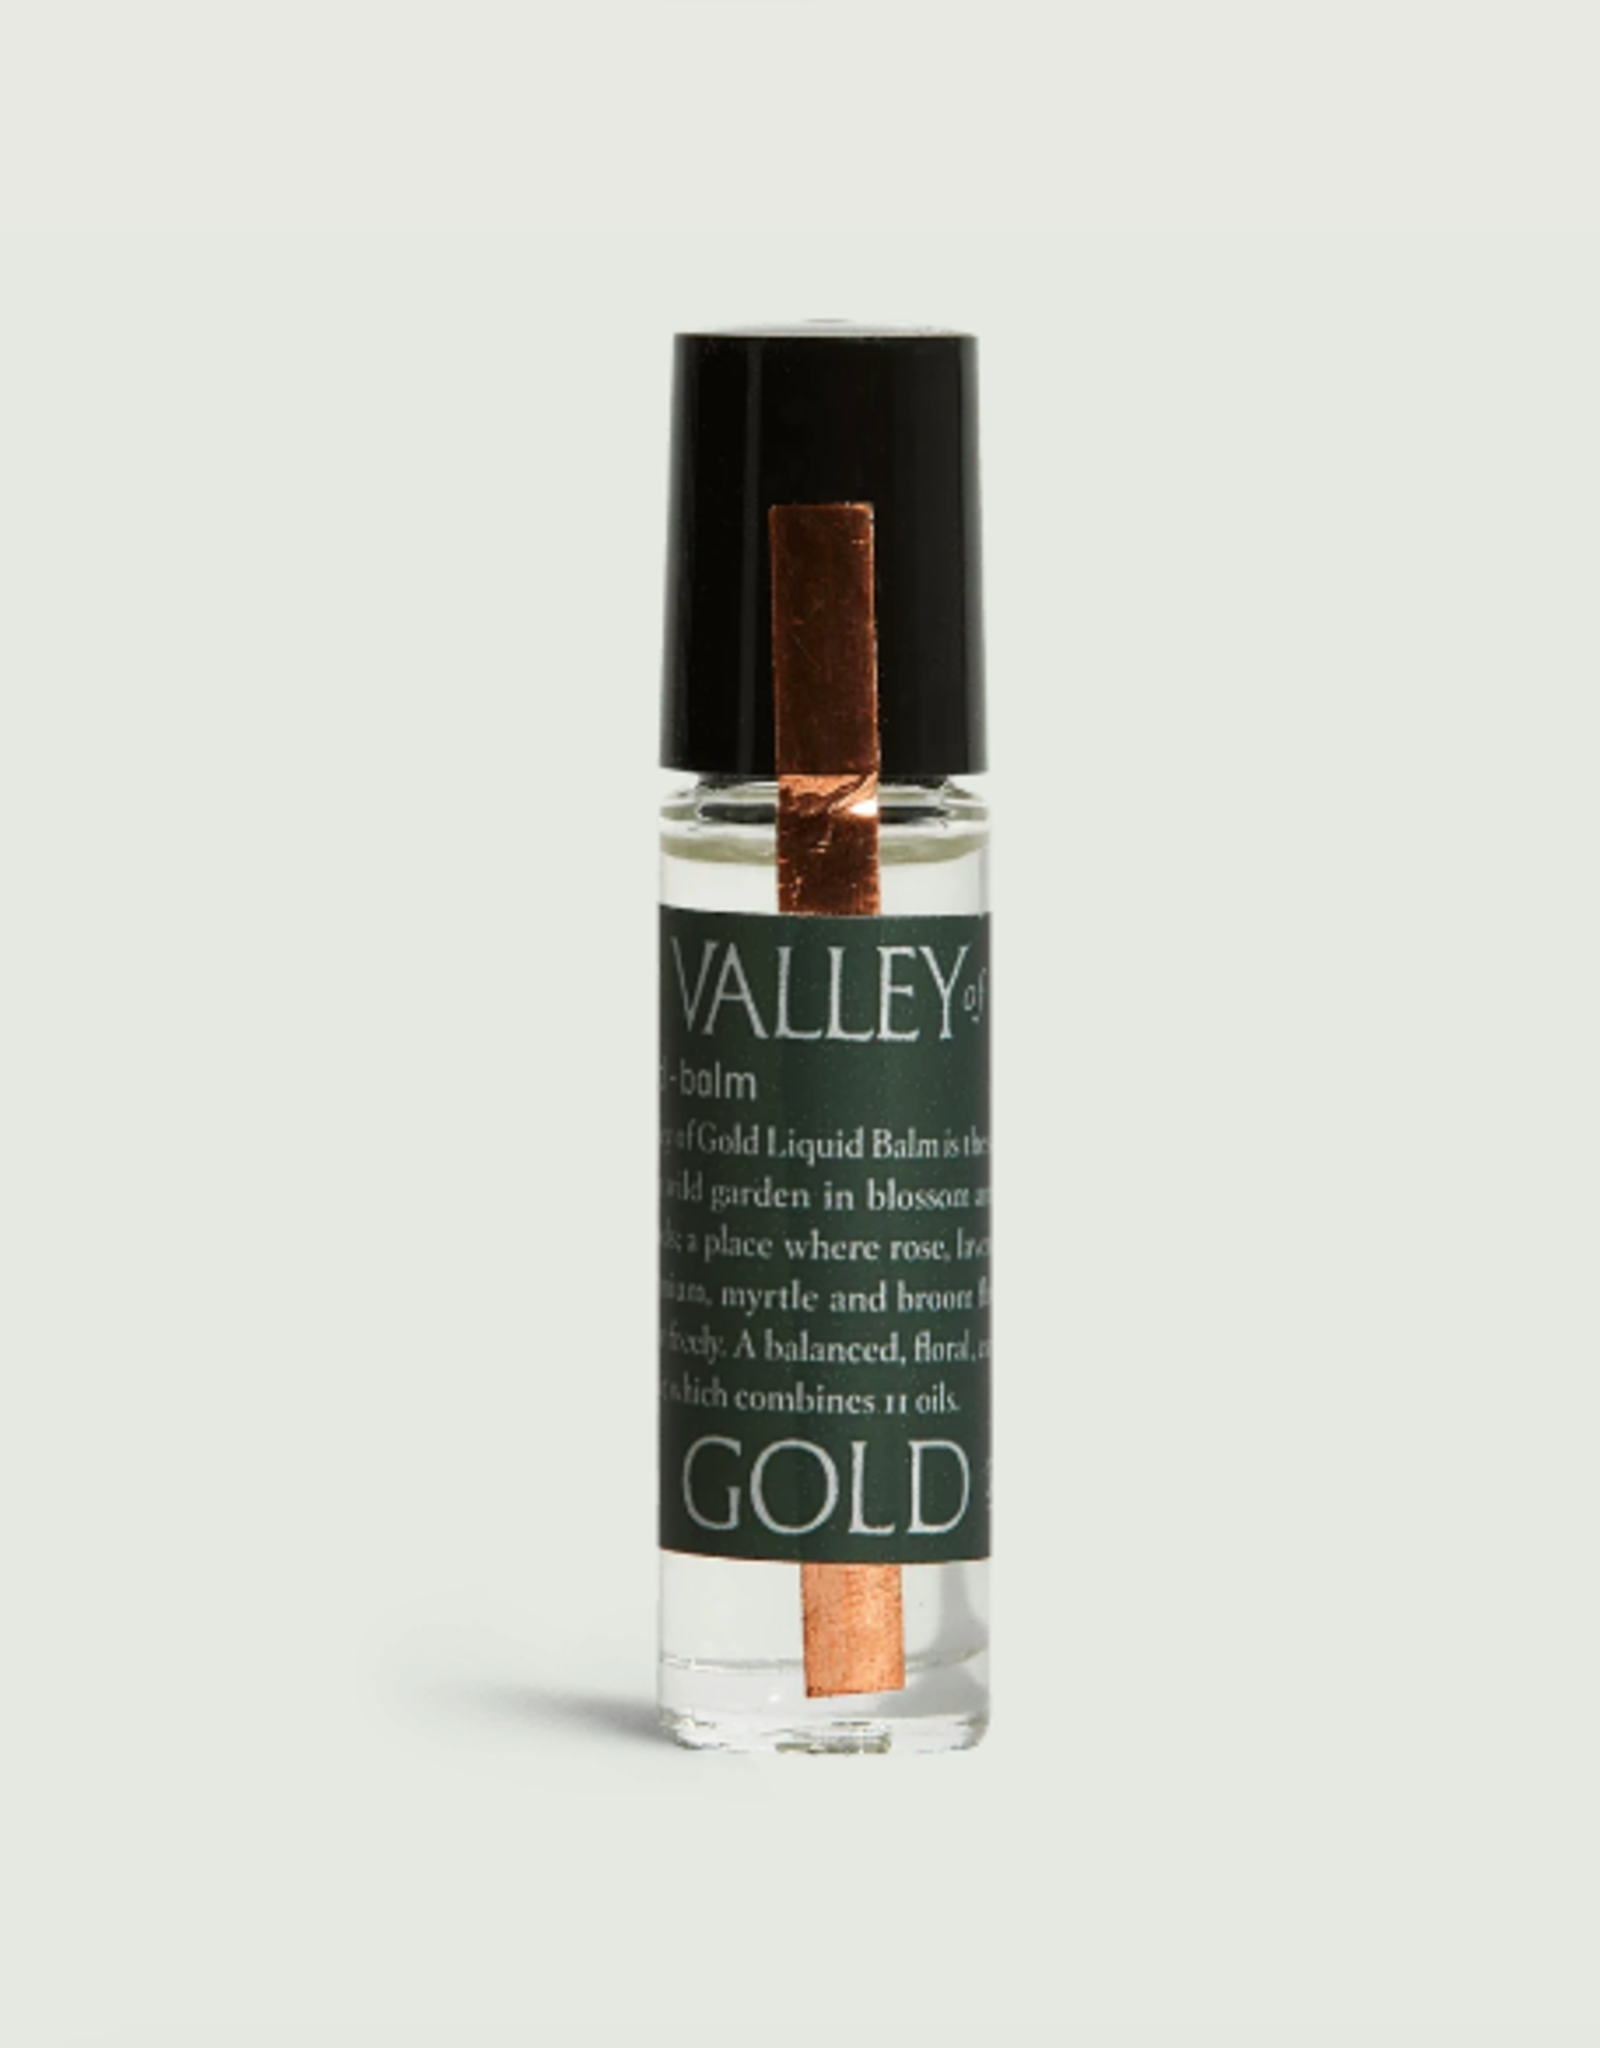 Valley of Gold Roll-On Cologne